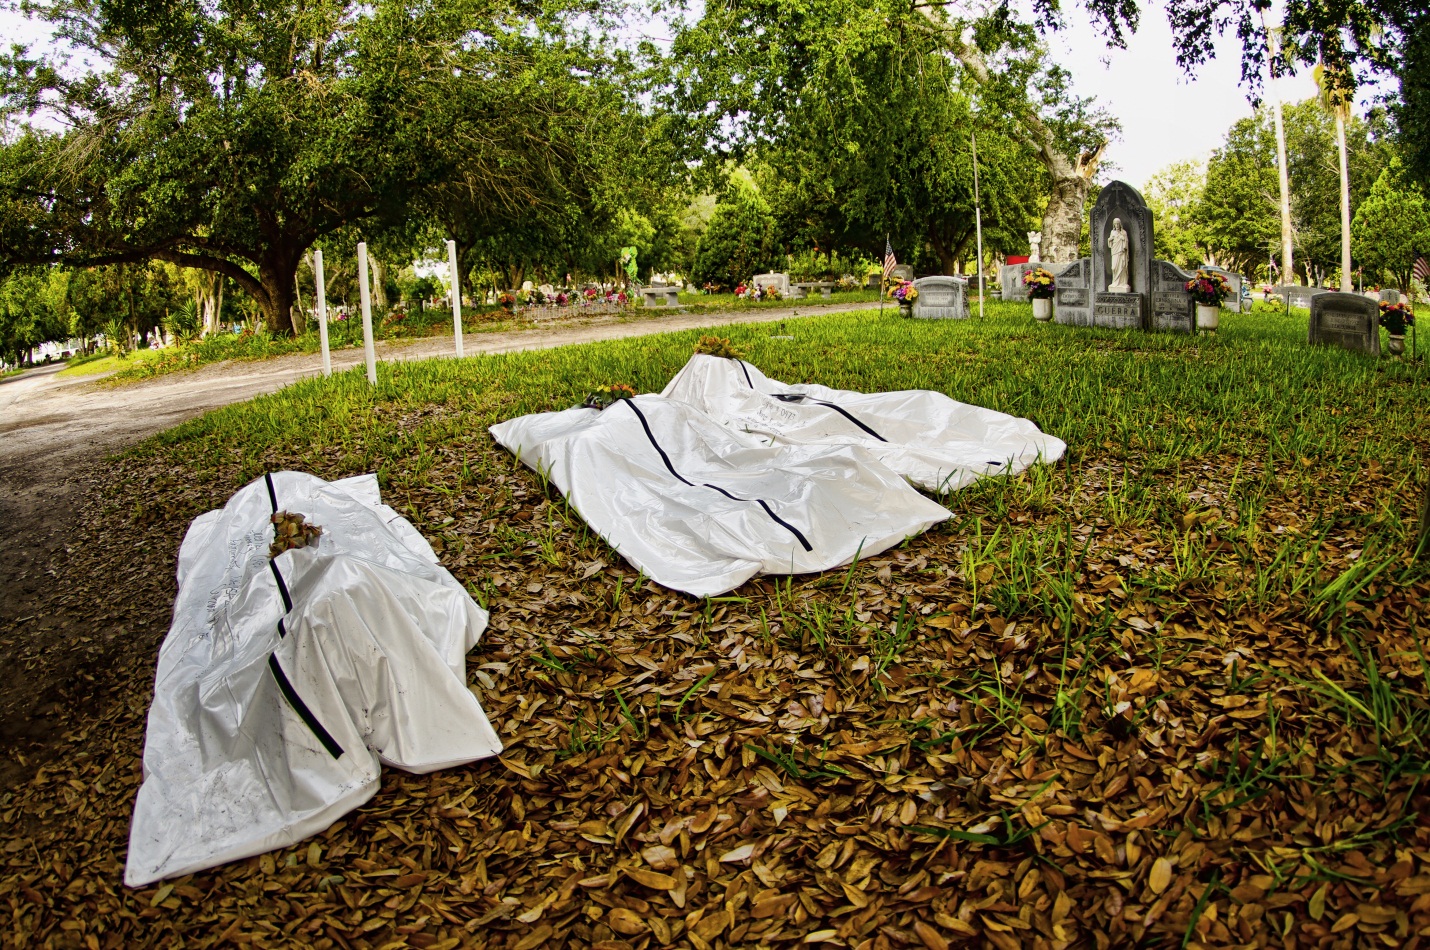 3 white body bags laid out on a grassy, leaf-filled area